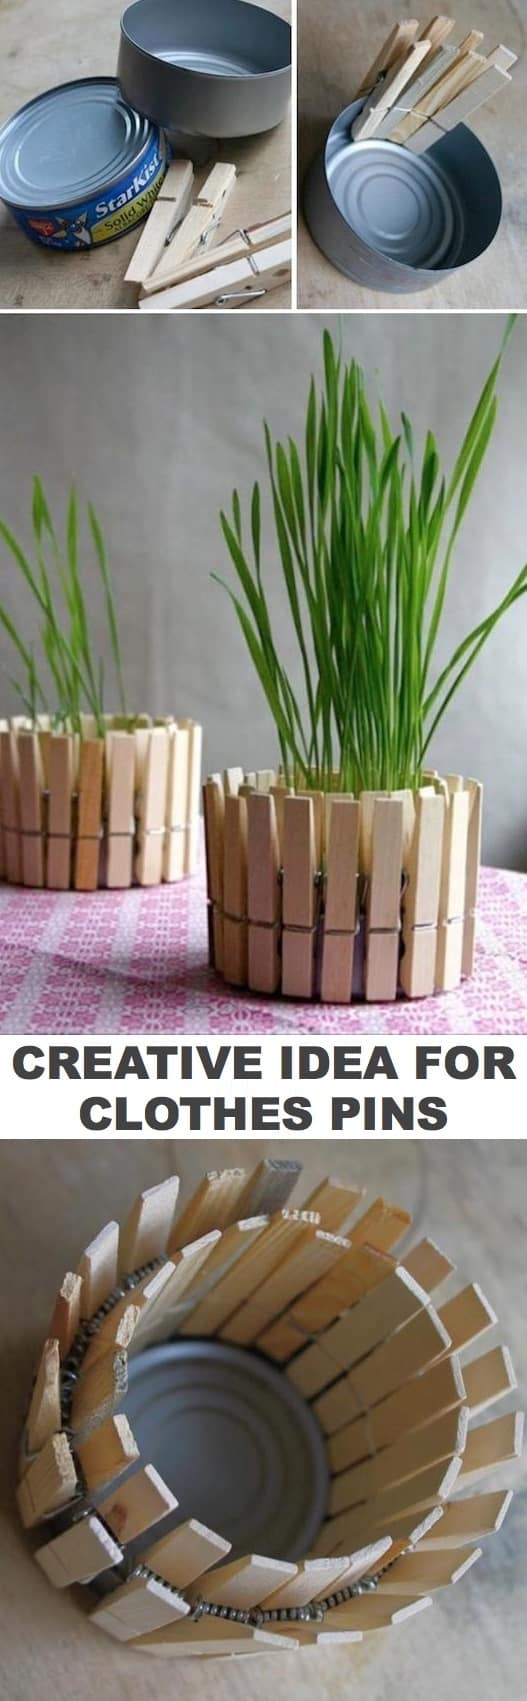 Painting Craft Ideas For Adults
 Easy DIY Craft Ideas That Will Spark Your Creativity for